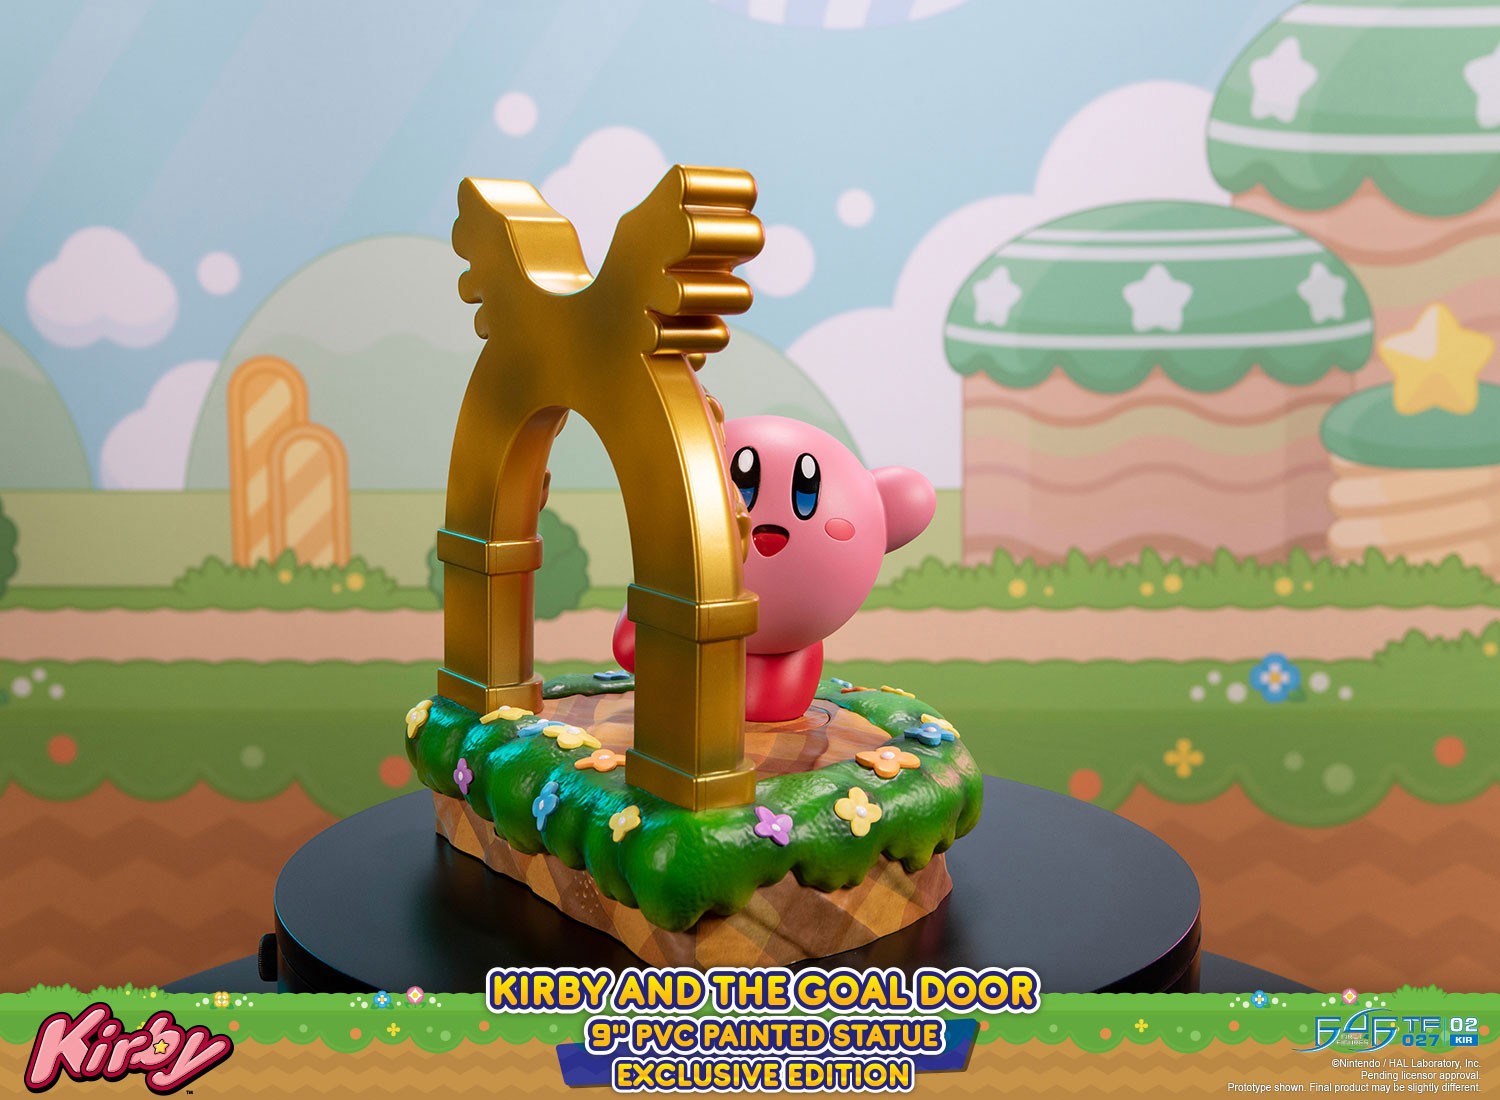 Pre-Order | Kirby™ and the Goal Door (Exclusive Edition) | First 4